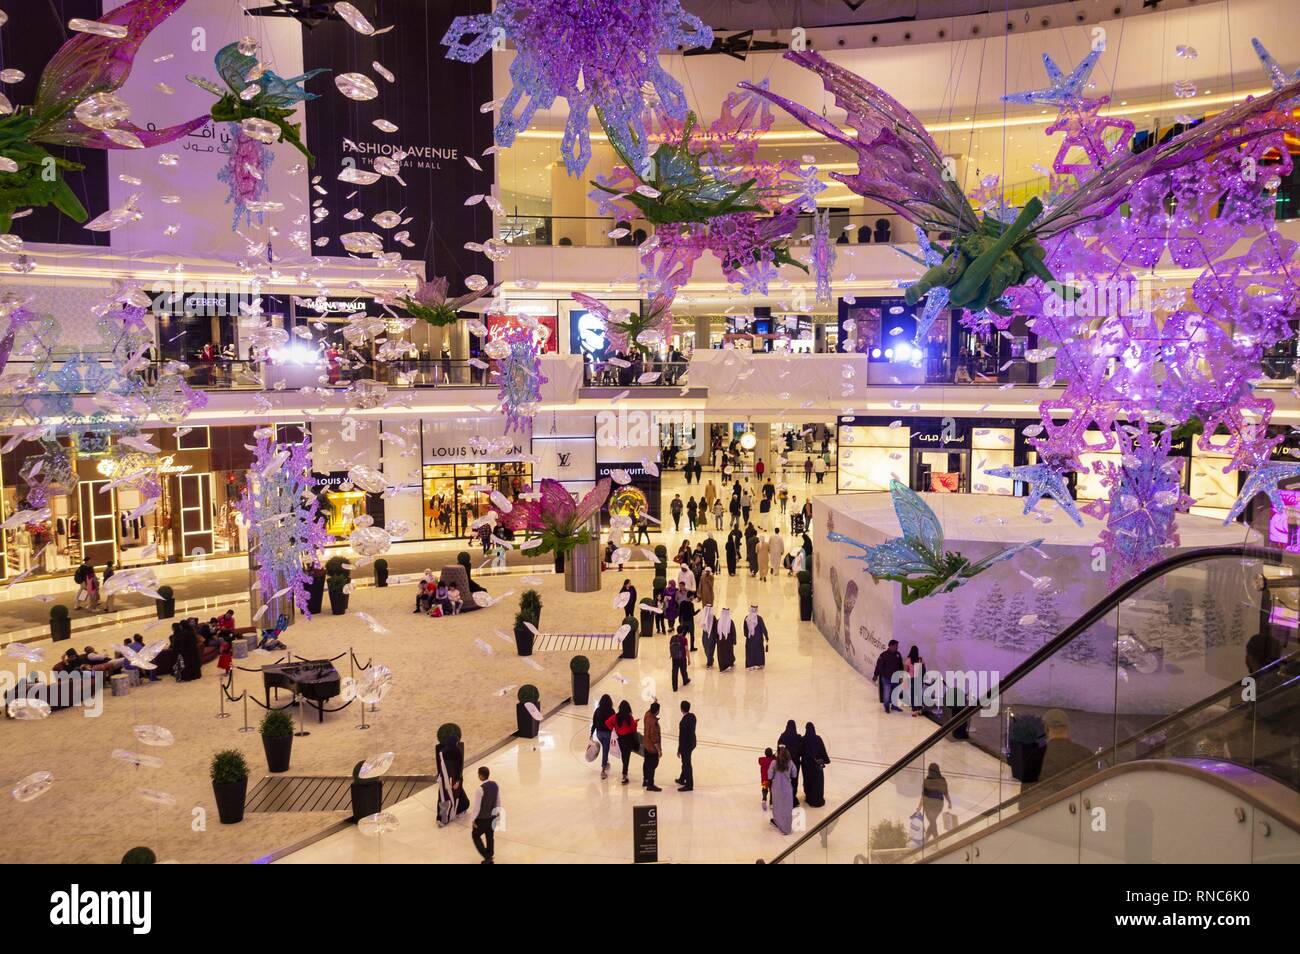 The individual floors of the Dubai Mall in the Downtown Dubai district are imaginatively decorated. With 350,000 square meters of retail space, the Dubai Mail is one of the largest shopping centers in the world. (11 January 2019) | usage worldwide Stock Photo